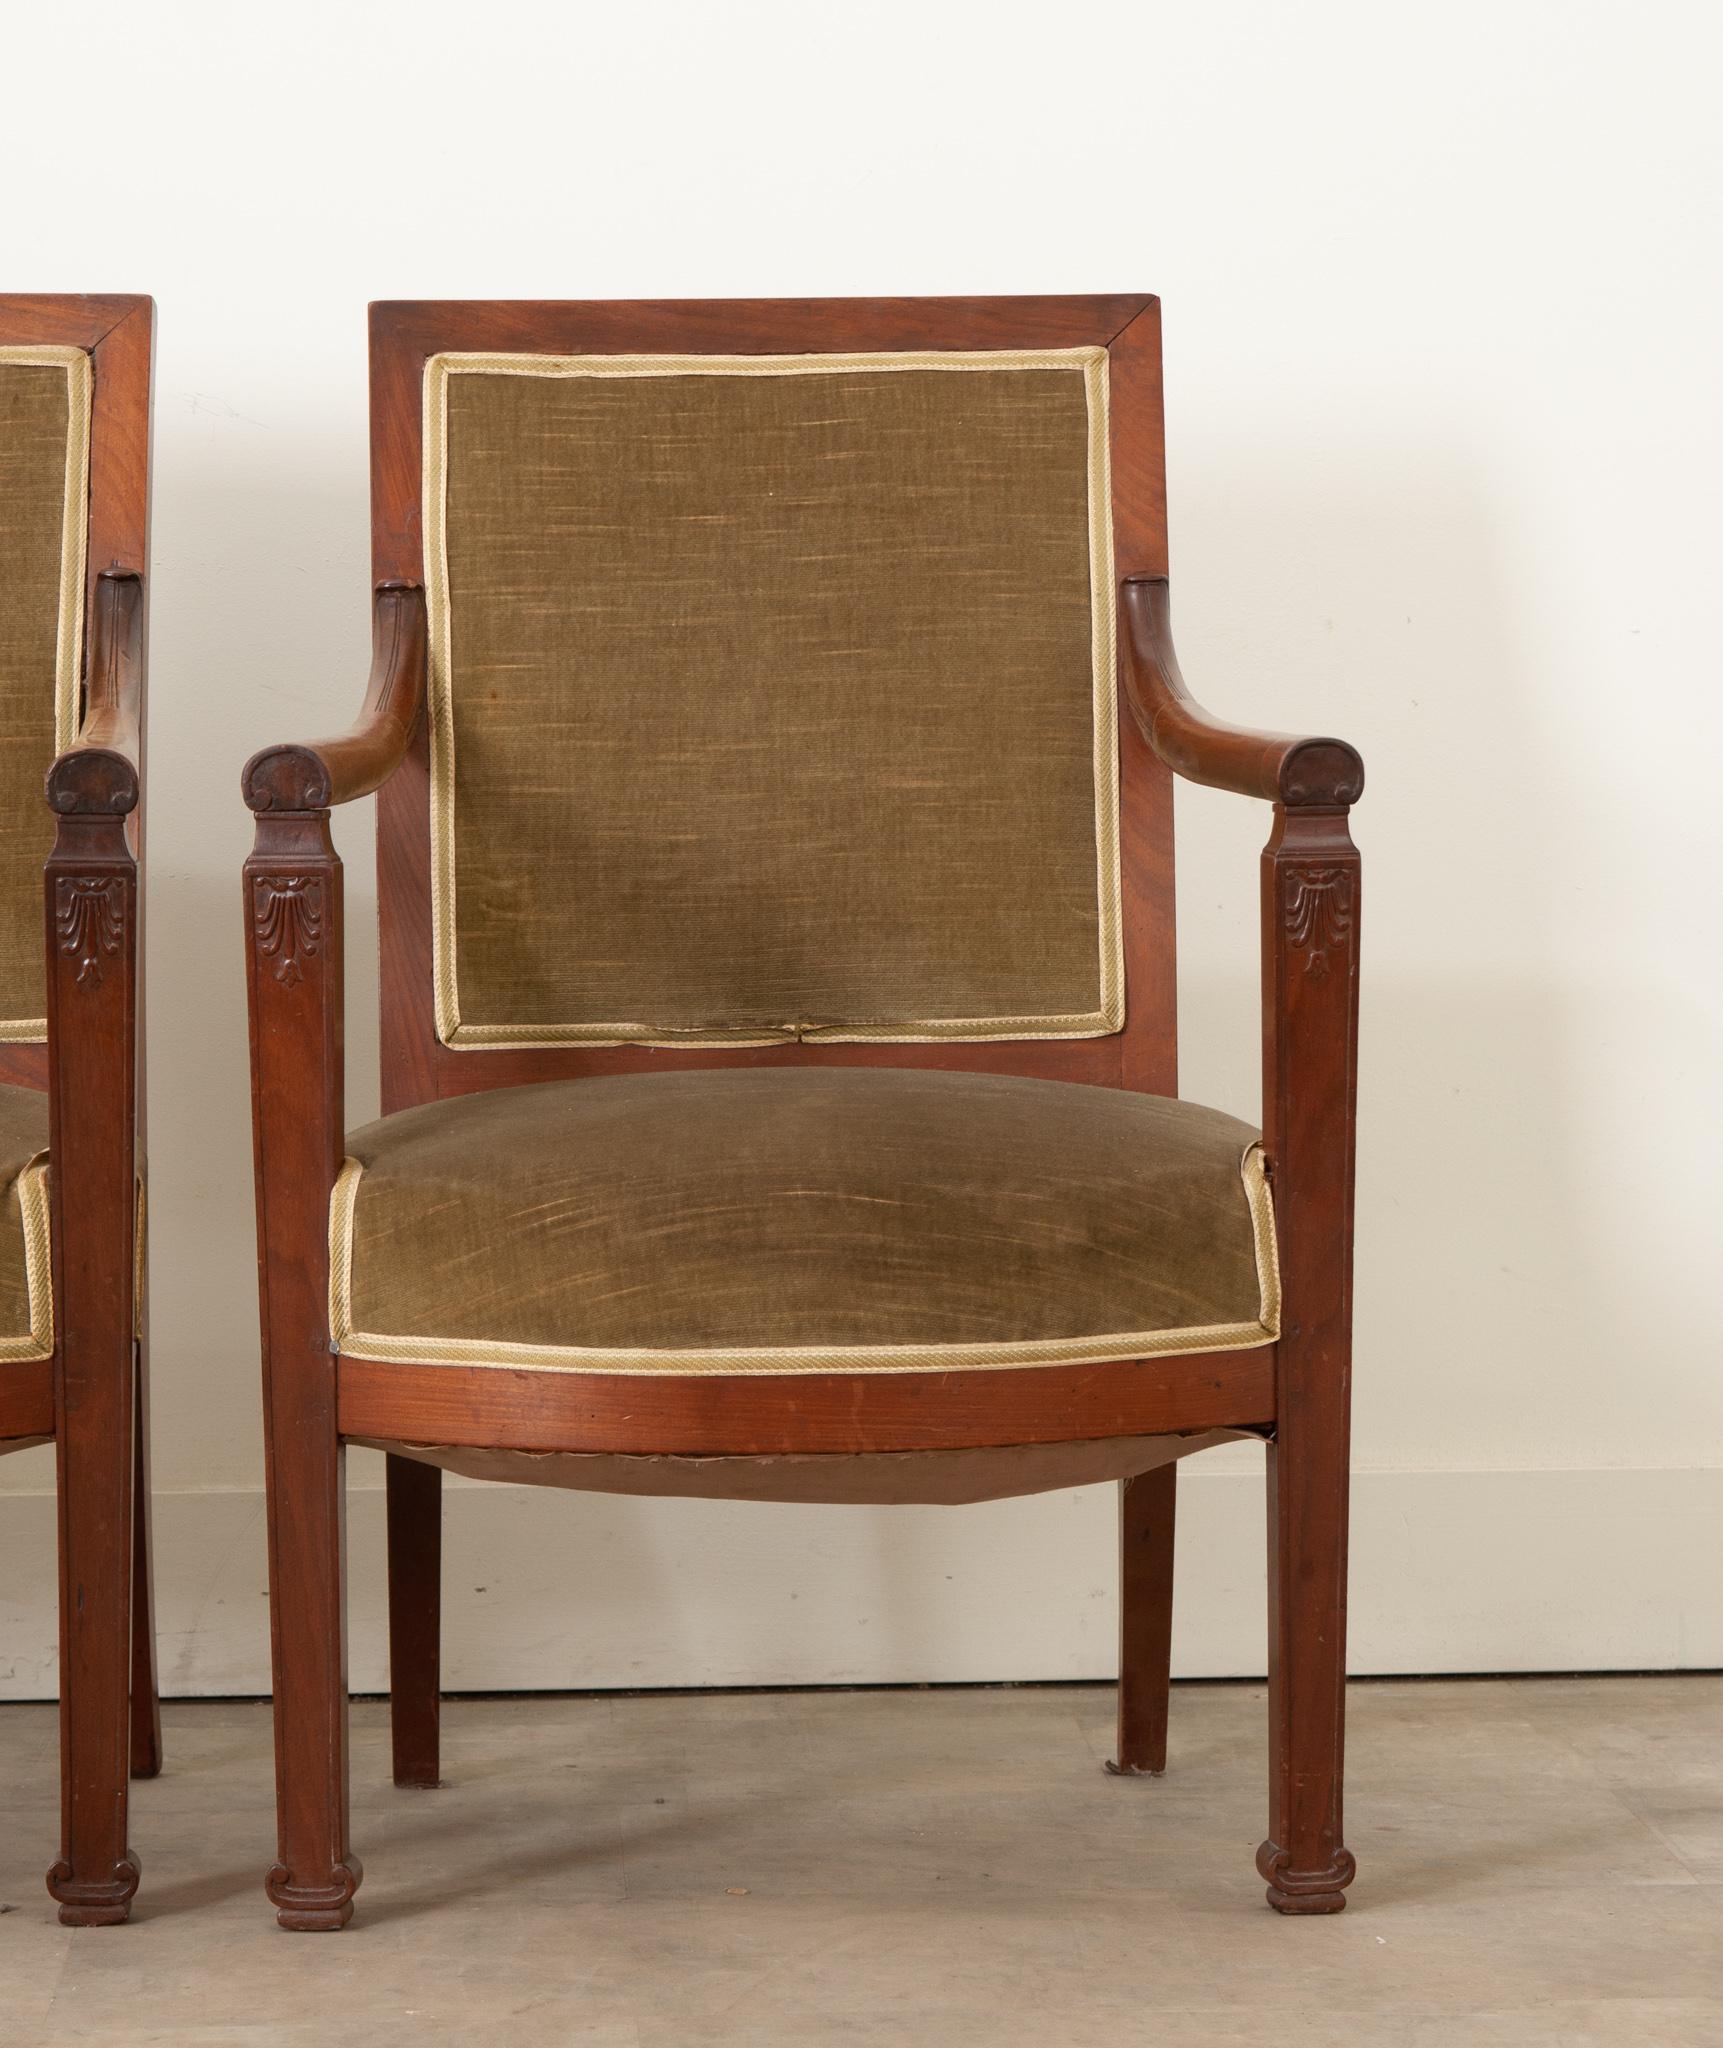 Pair of French Directoire Mahogany Fauteuils In Good Condition For Sale In Baton Rouge, LA